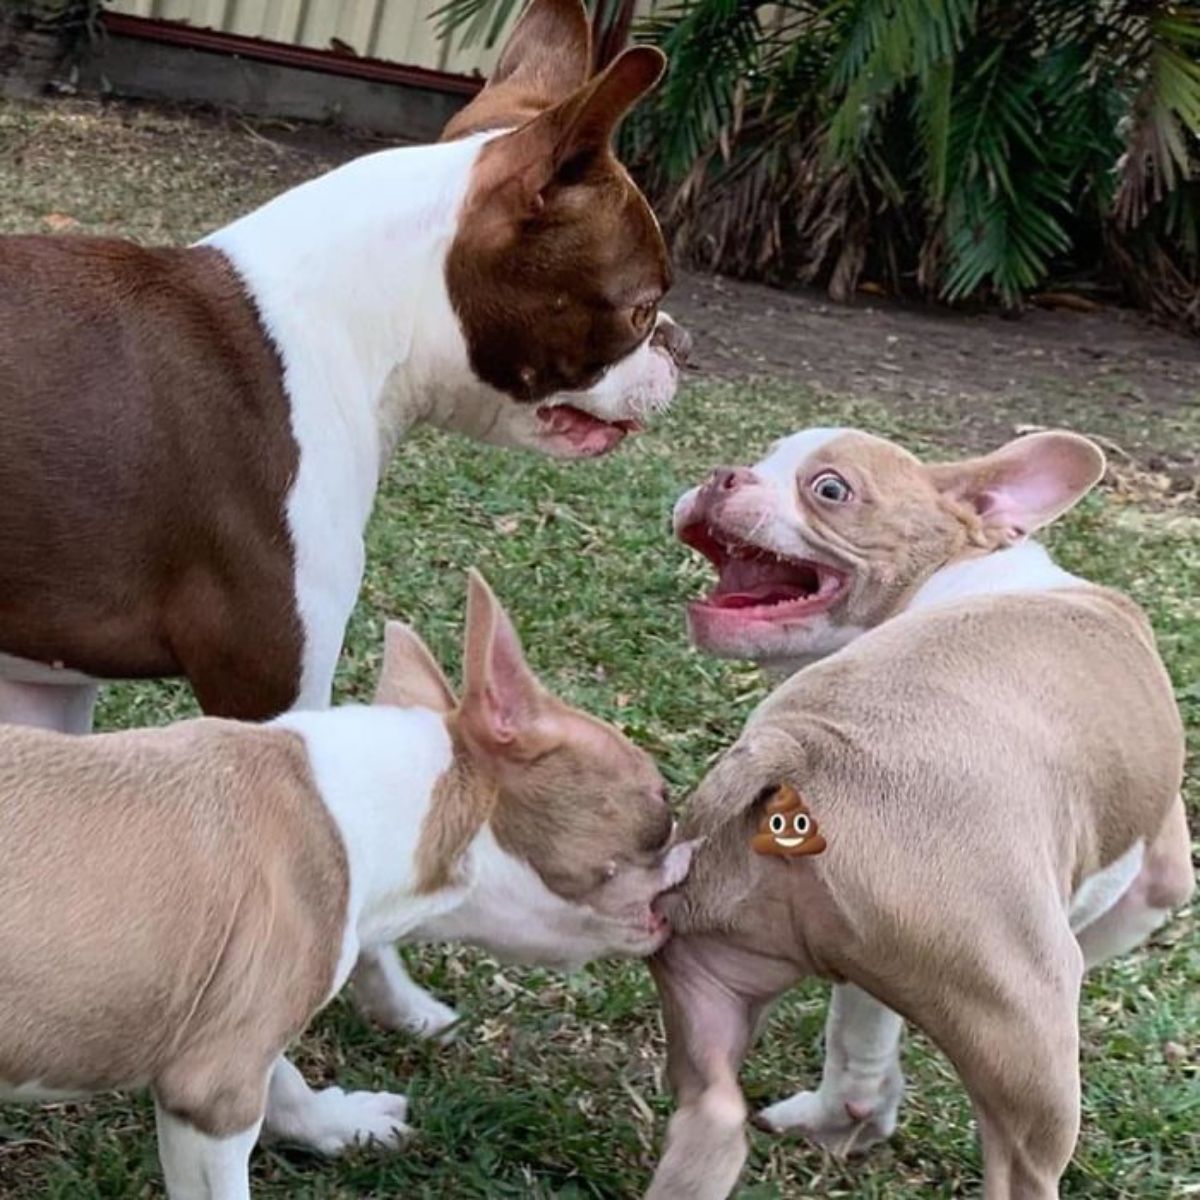 light brown and white dog biting the butt of another light brown and white dog while a dark brown and white dog stands next to them